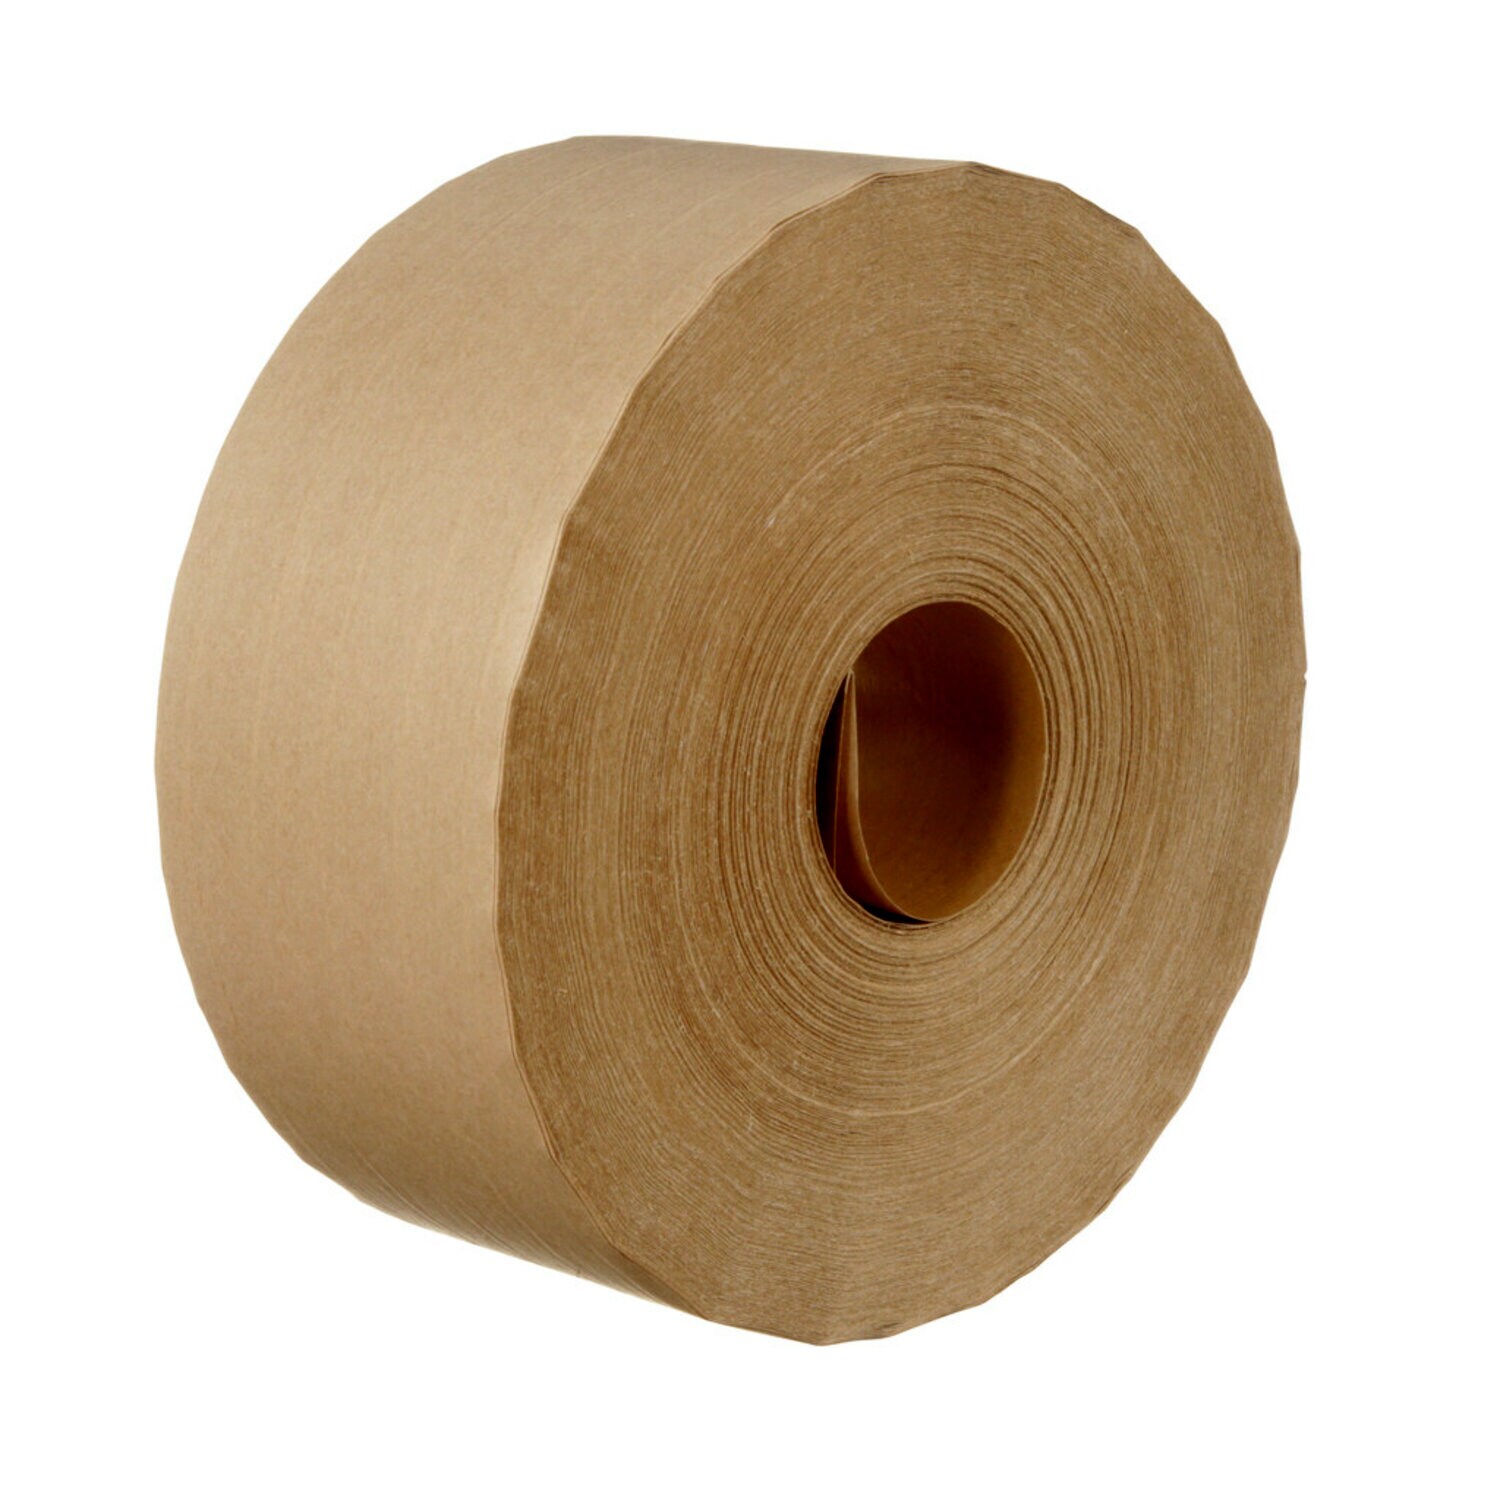 7000124808 - 3M Water Activated Paper Tape 6147, Natural, Performance Reinforced, 3
in x 450 ft, 10/Case